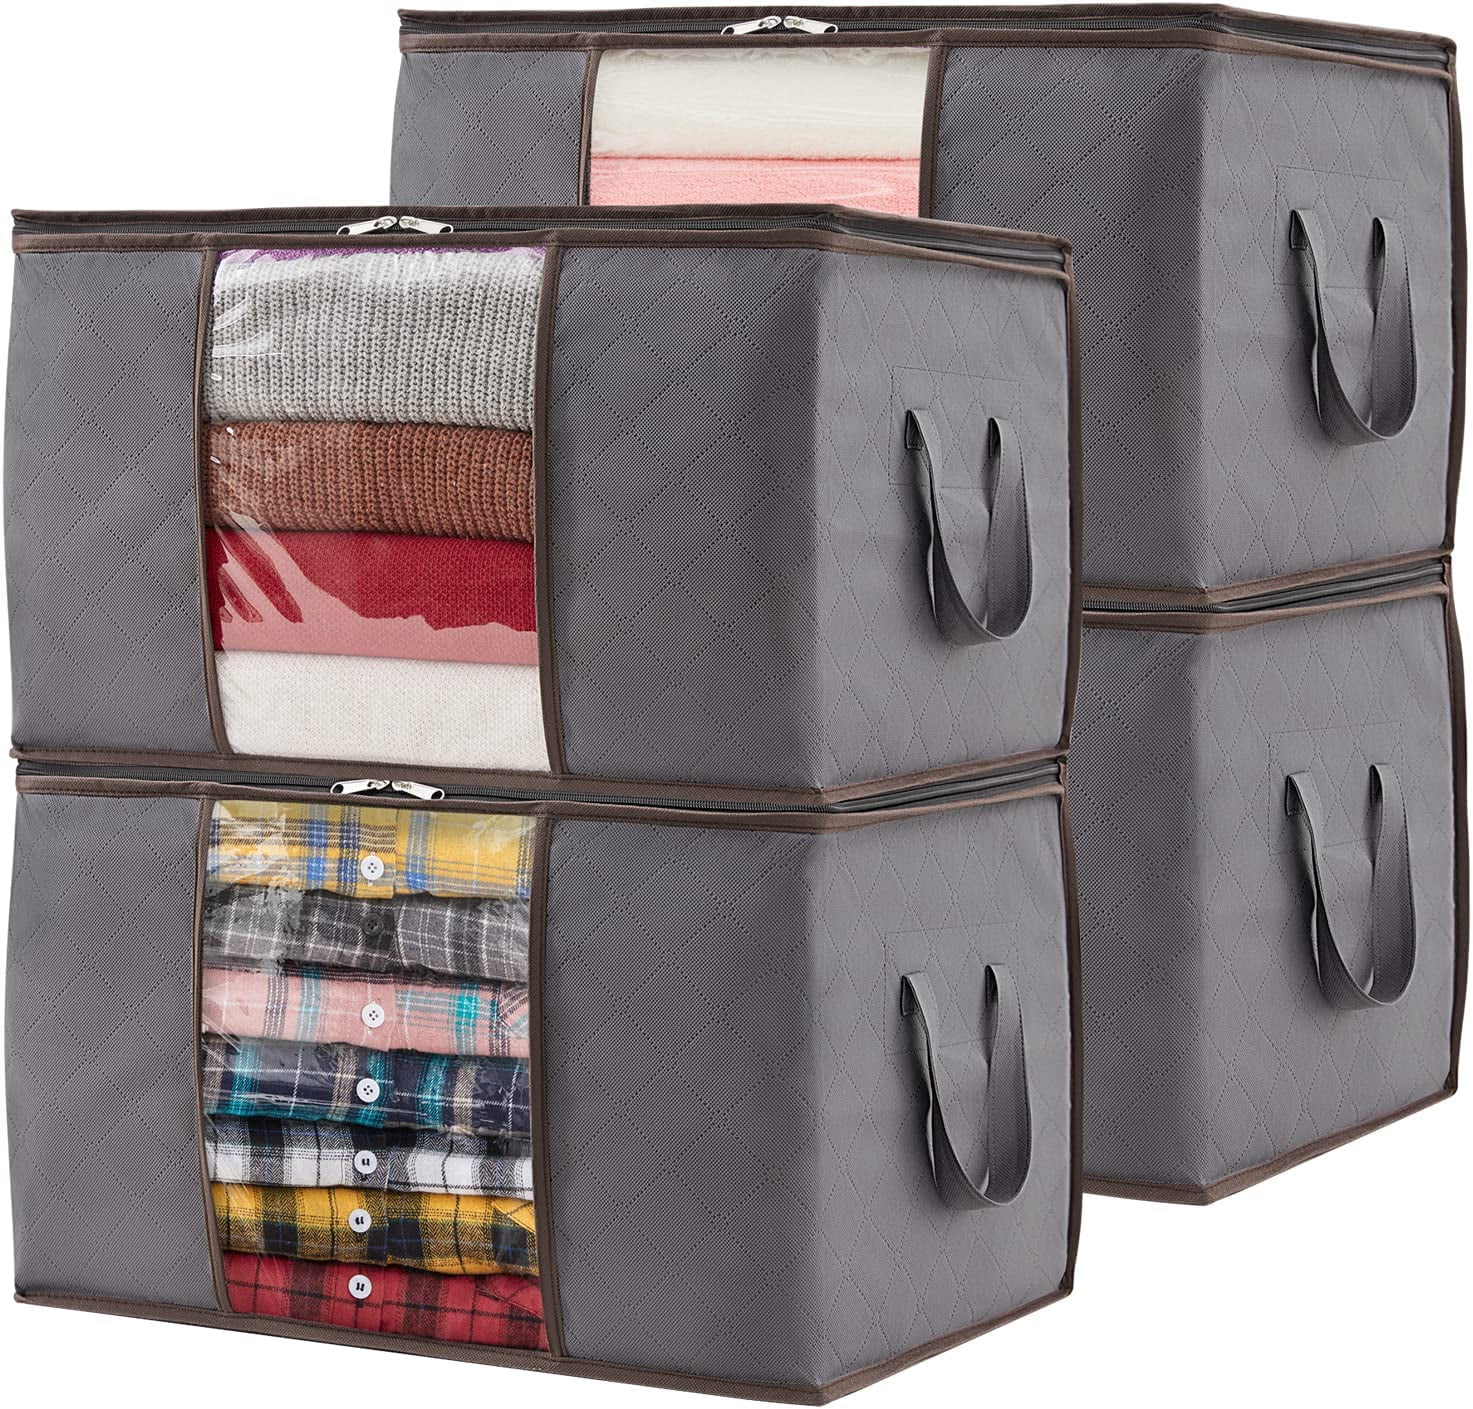 The Lifewit Storage Bags Are 43% Off at